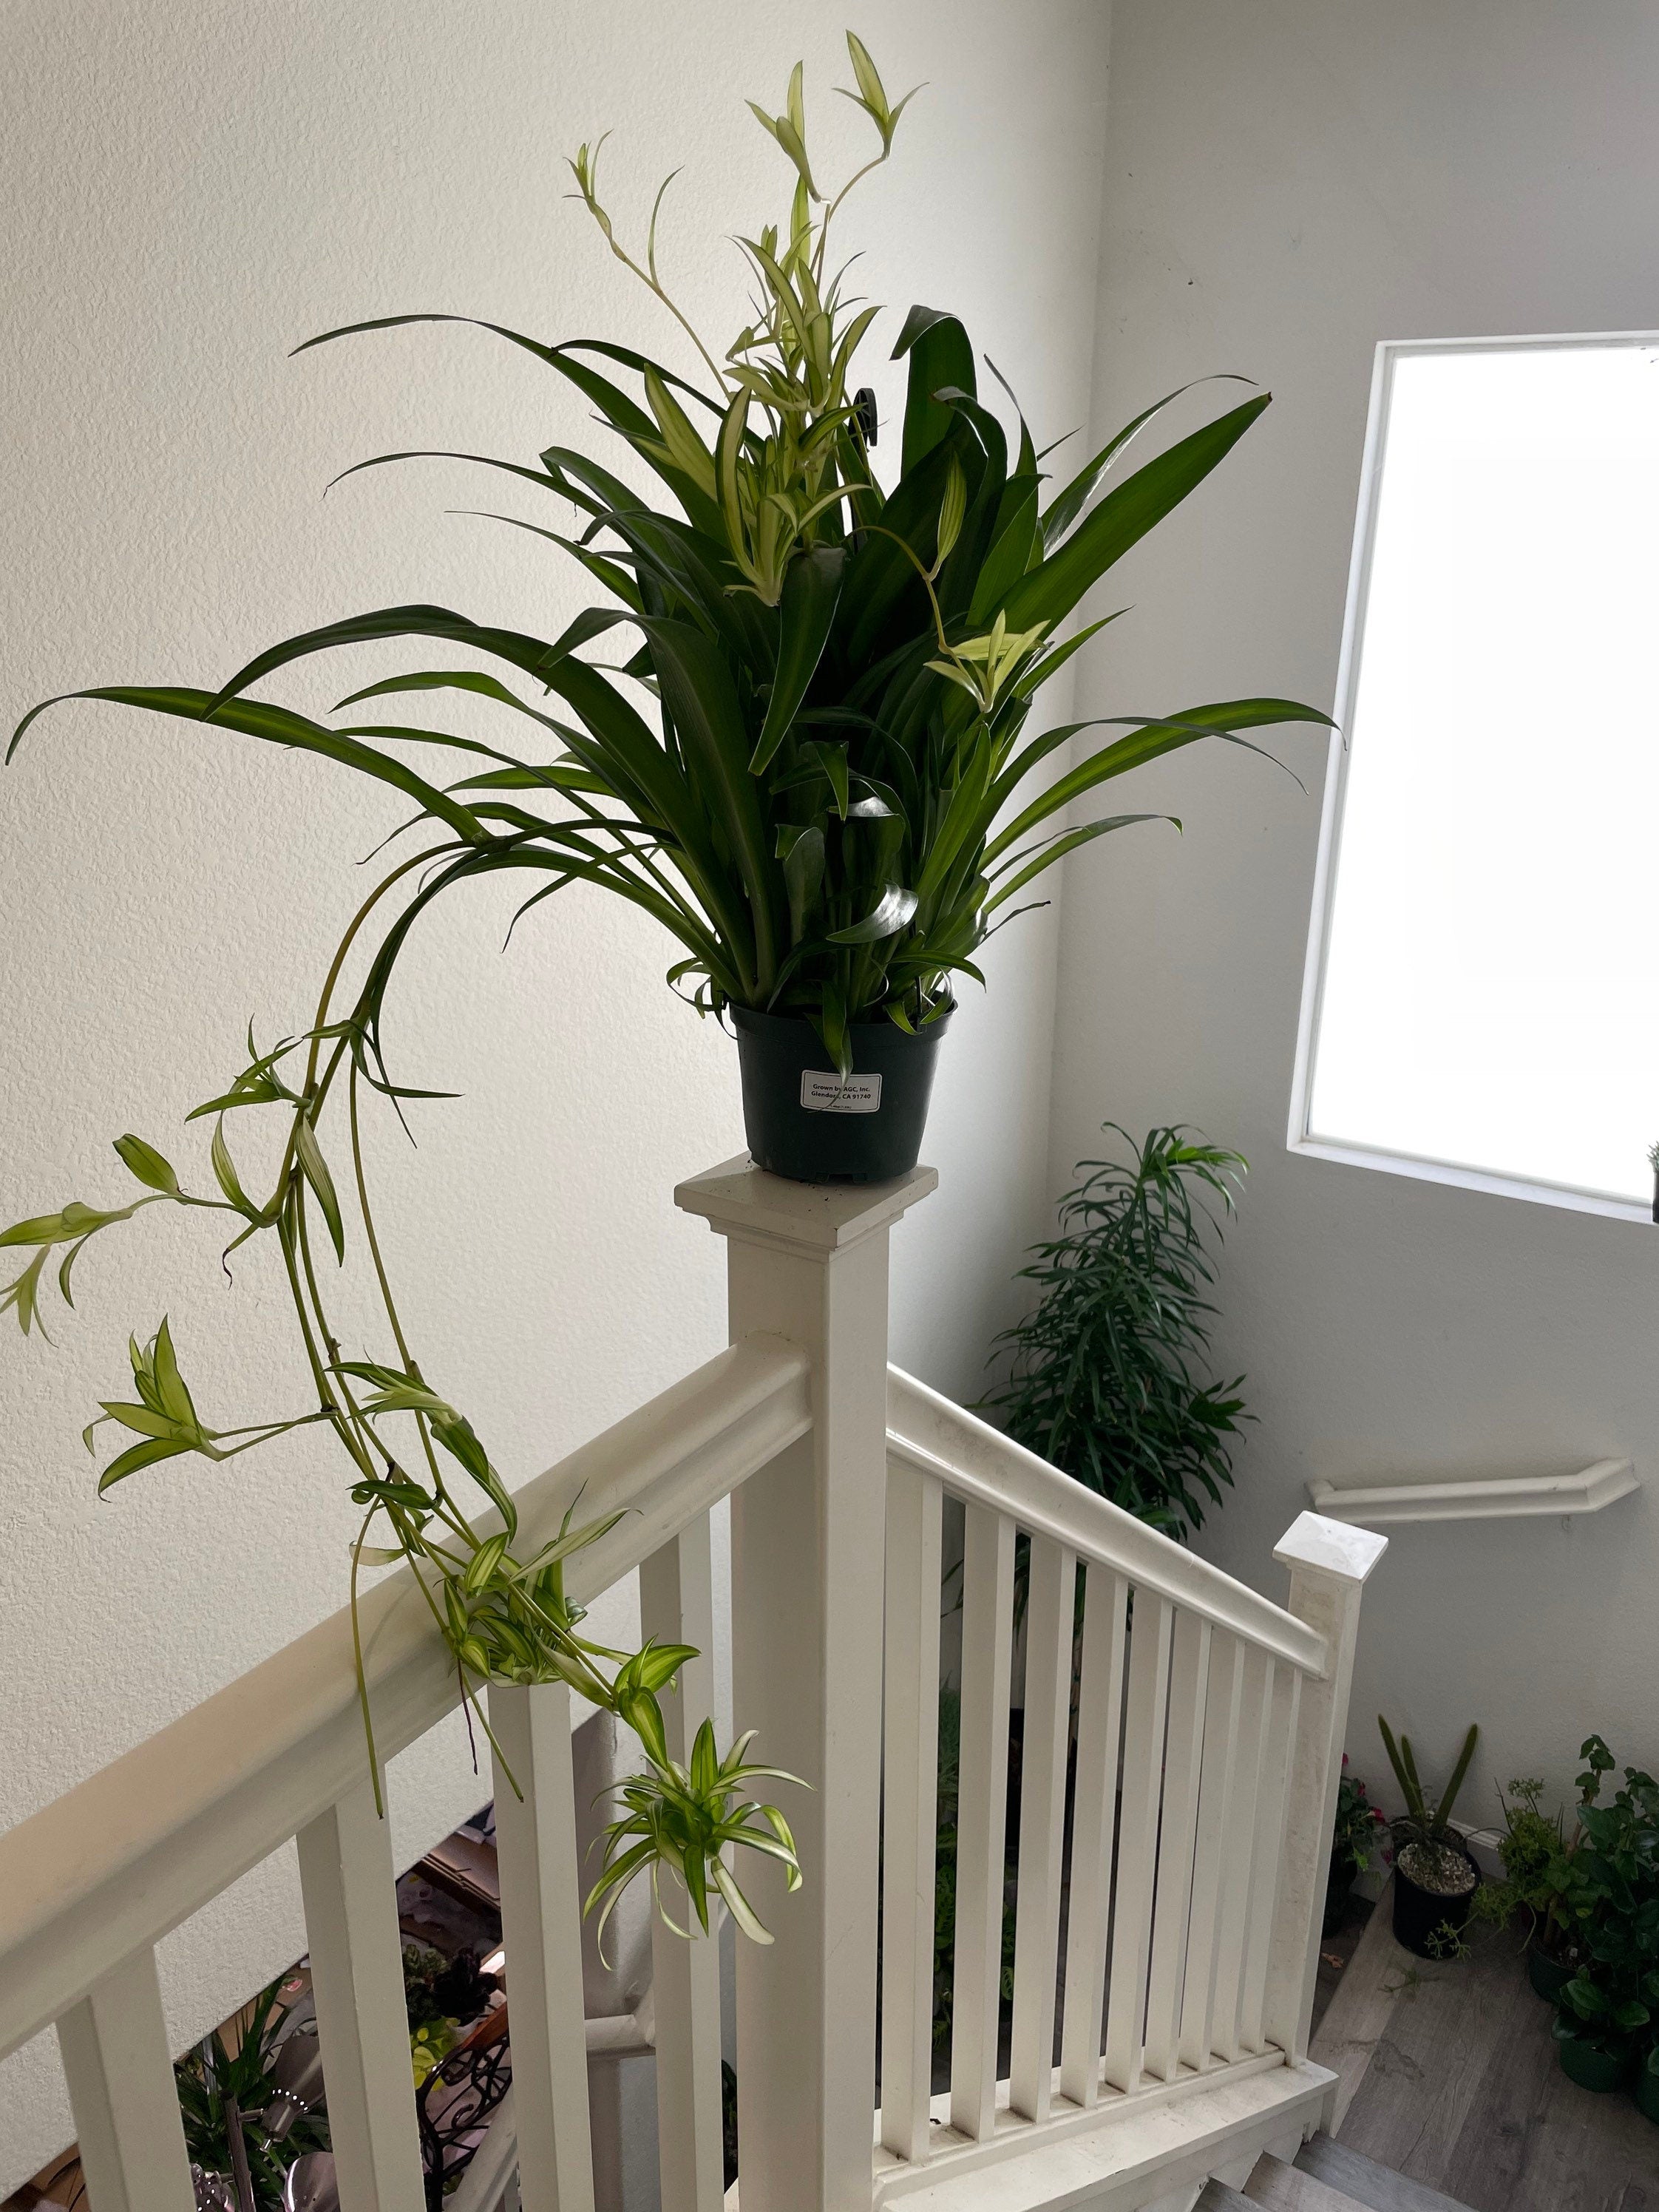 XL - 6 inch potted -green Spider plant with babies -Air Purifying Indoor Plant Chlorophytum -similar to photo not exact-